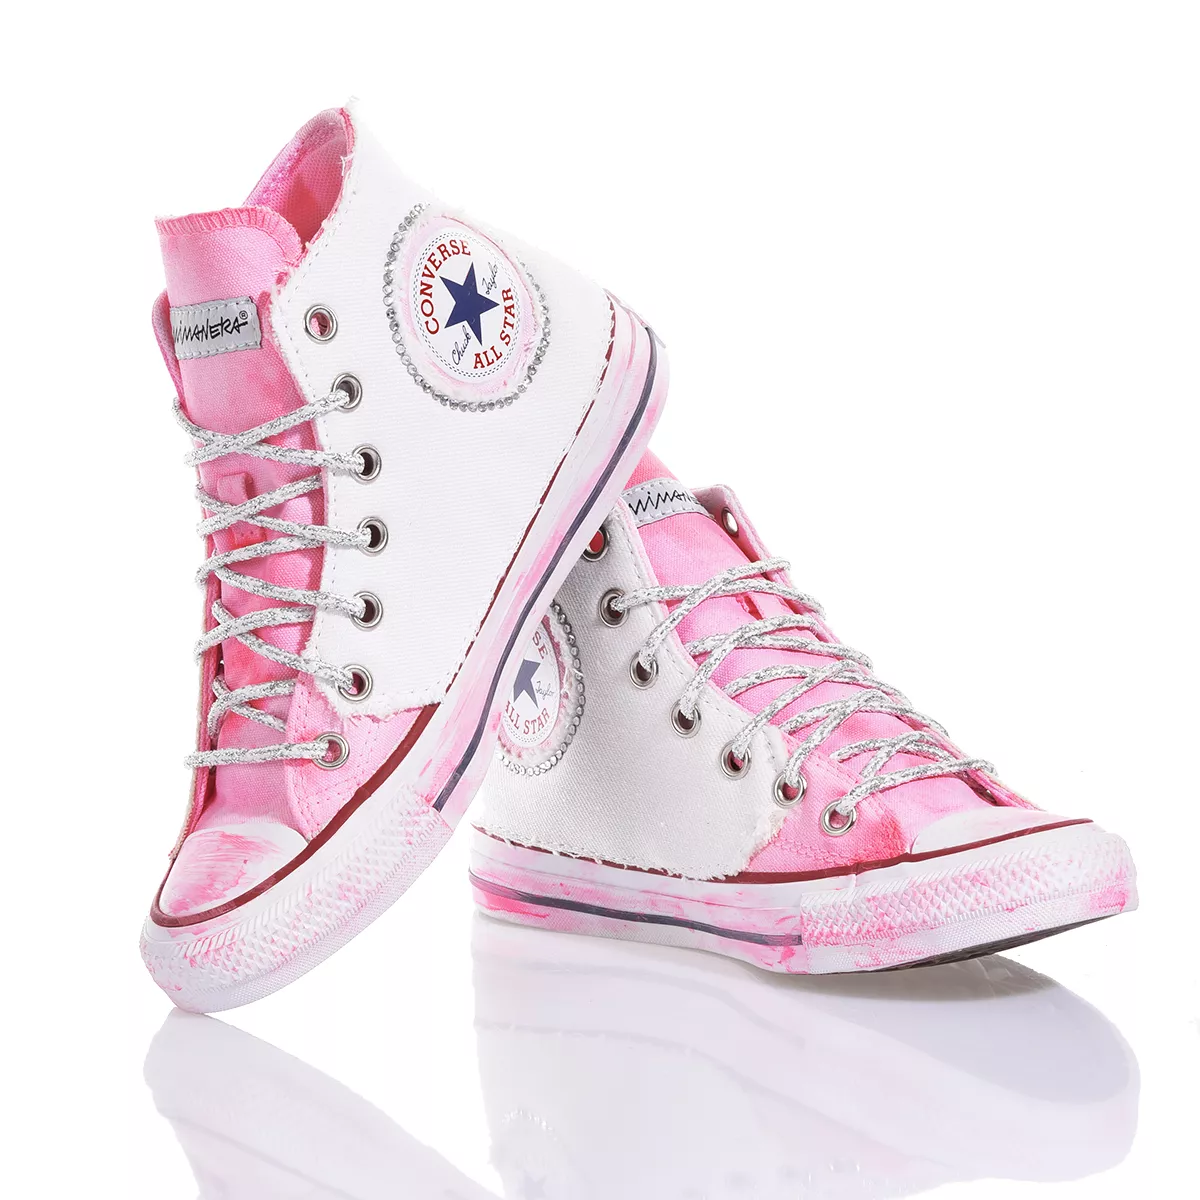 Converse Denim Pink Heart Chuck Taylor High Top Painted, Special, Swarovski